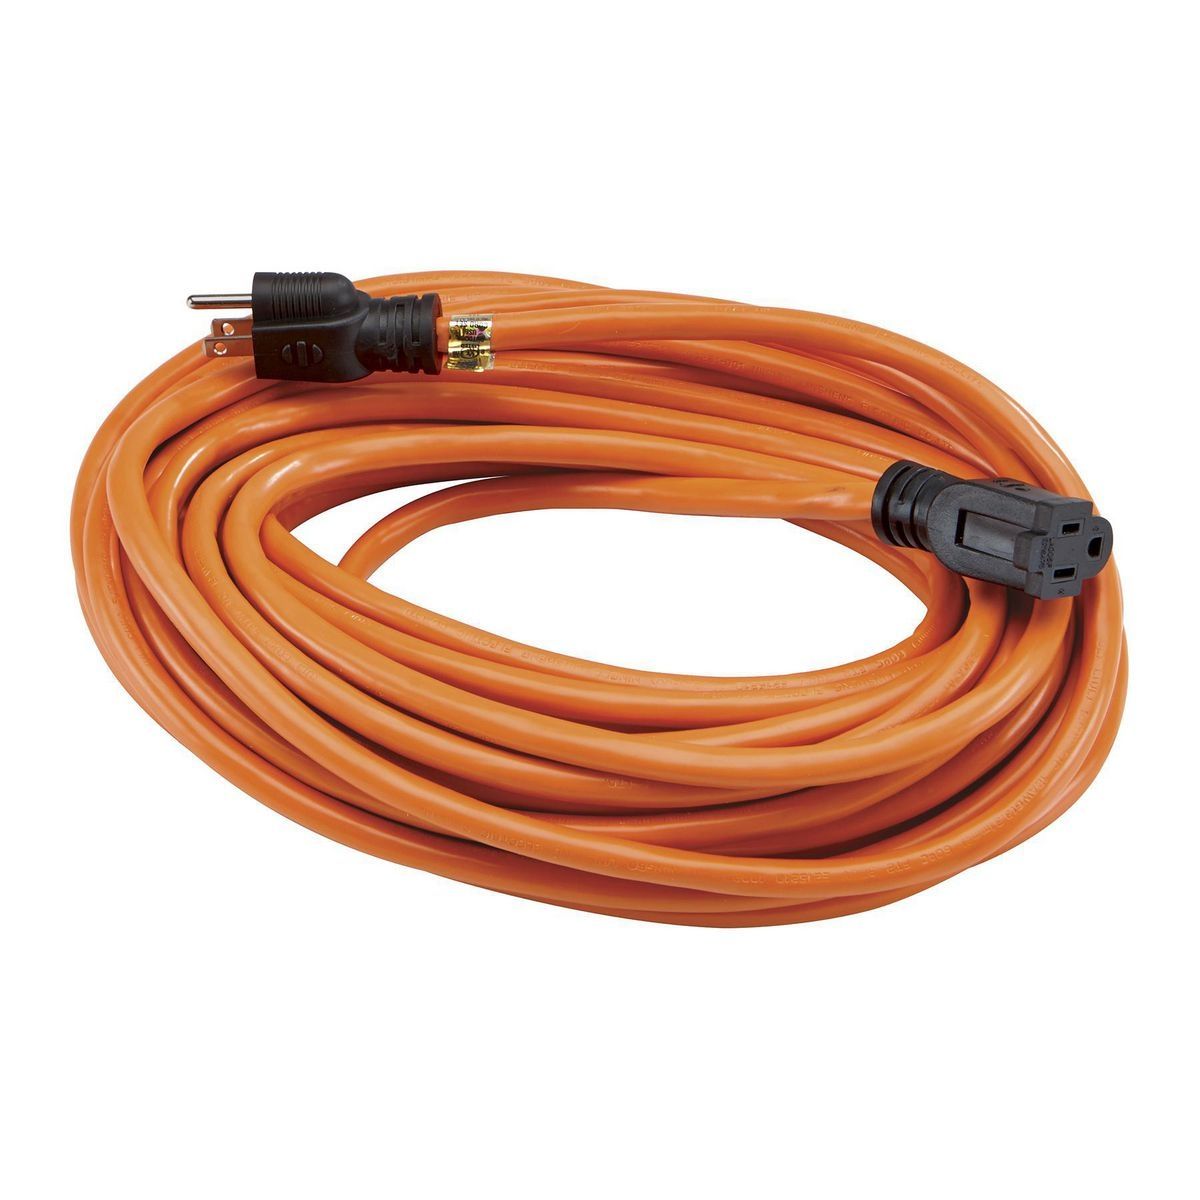 50 foot Power Cable